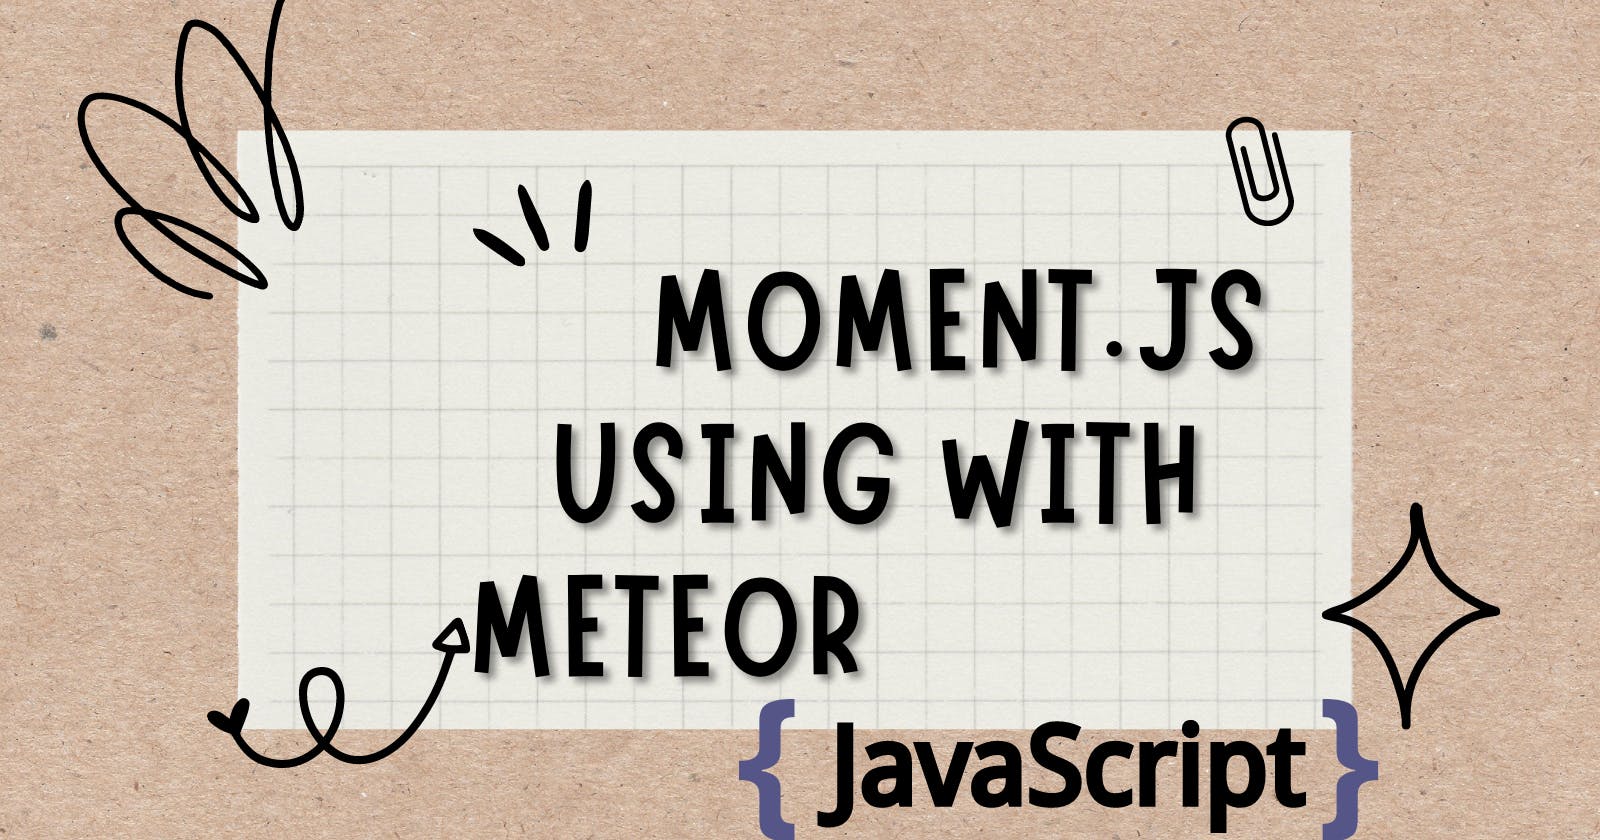 Moment.js using with meteor